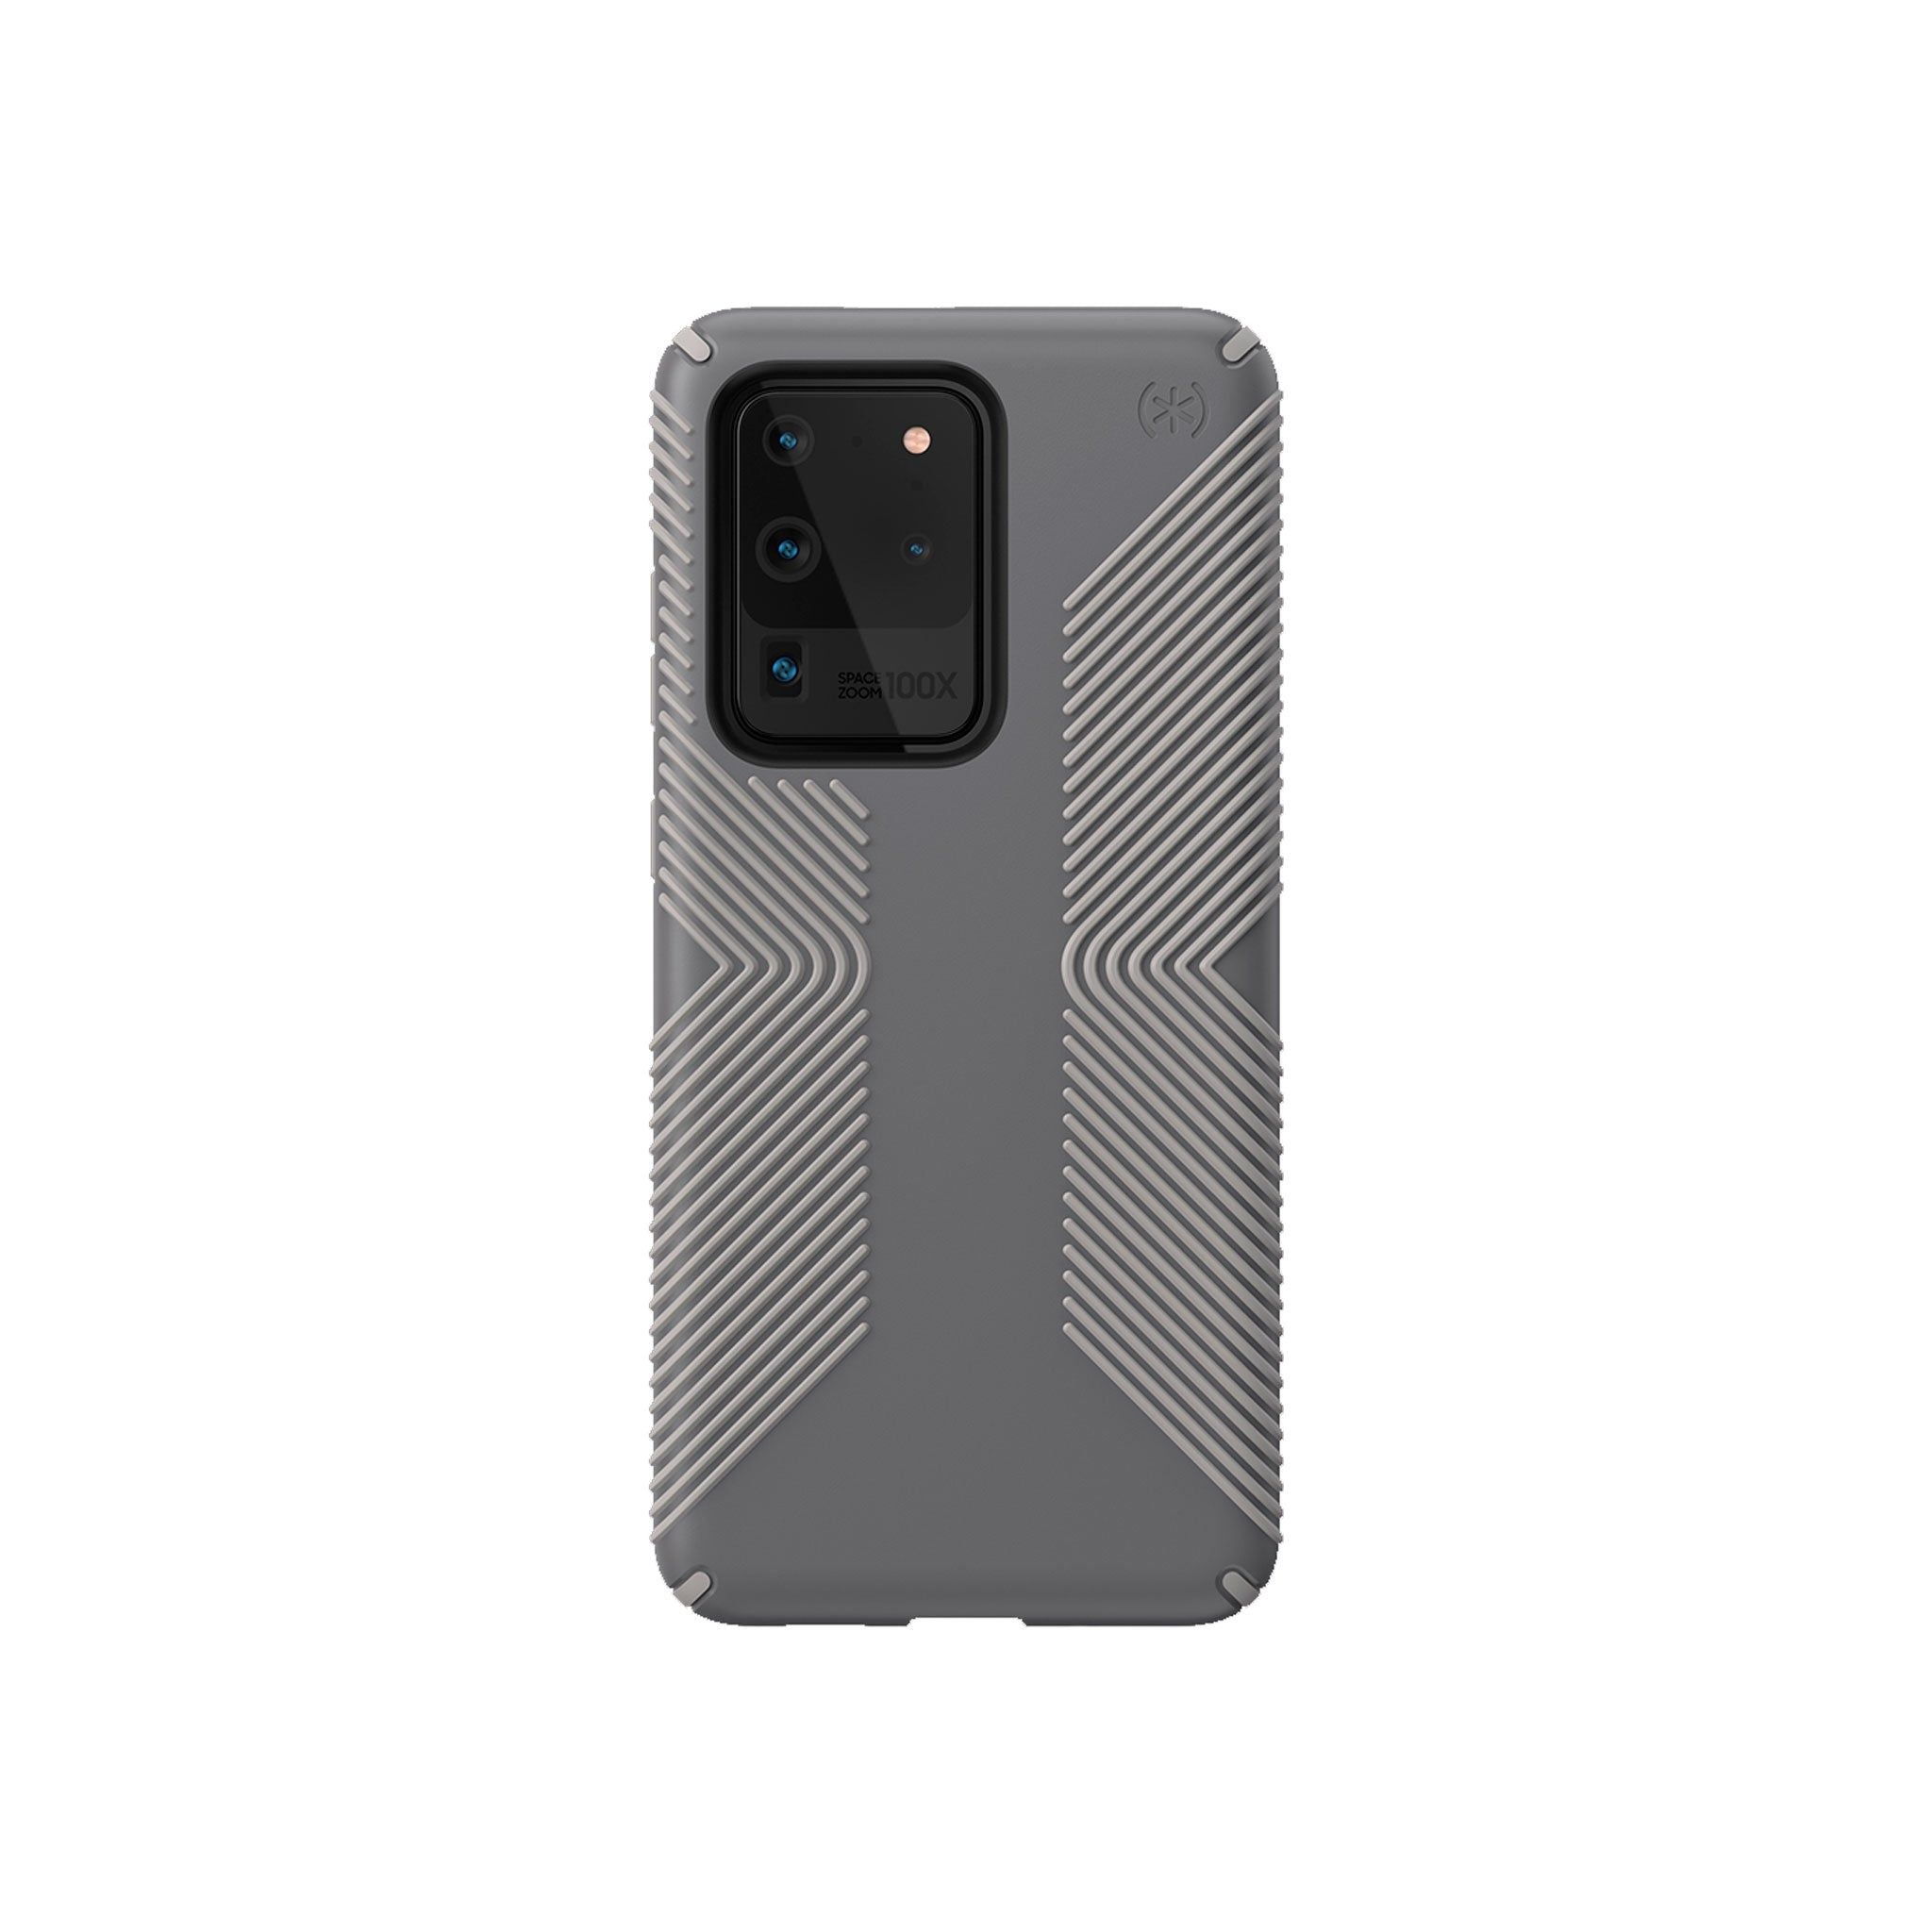 Speck - Presidio2 Grip Case For Samsung Galaxy S20 Ultra - Graphite Gray And Cathedral Gray